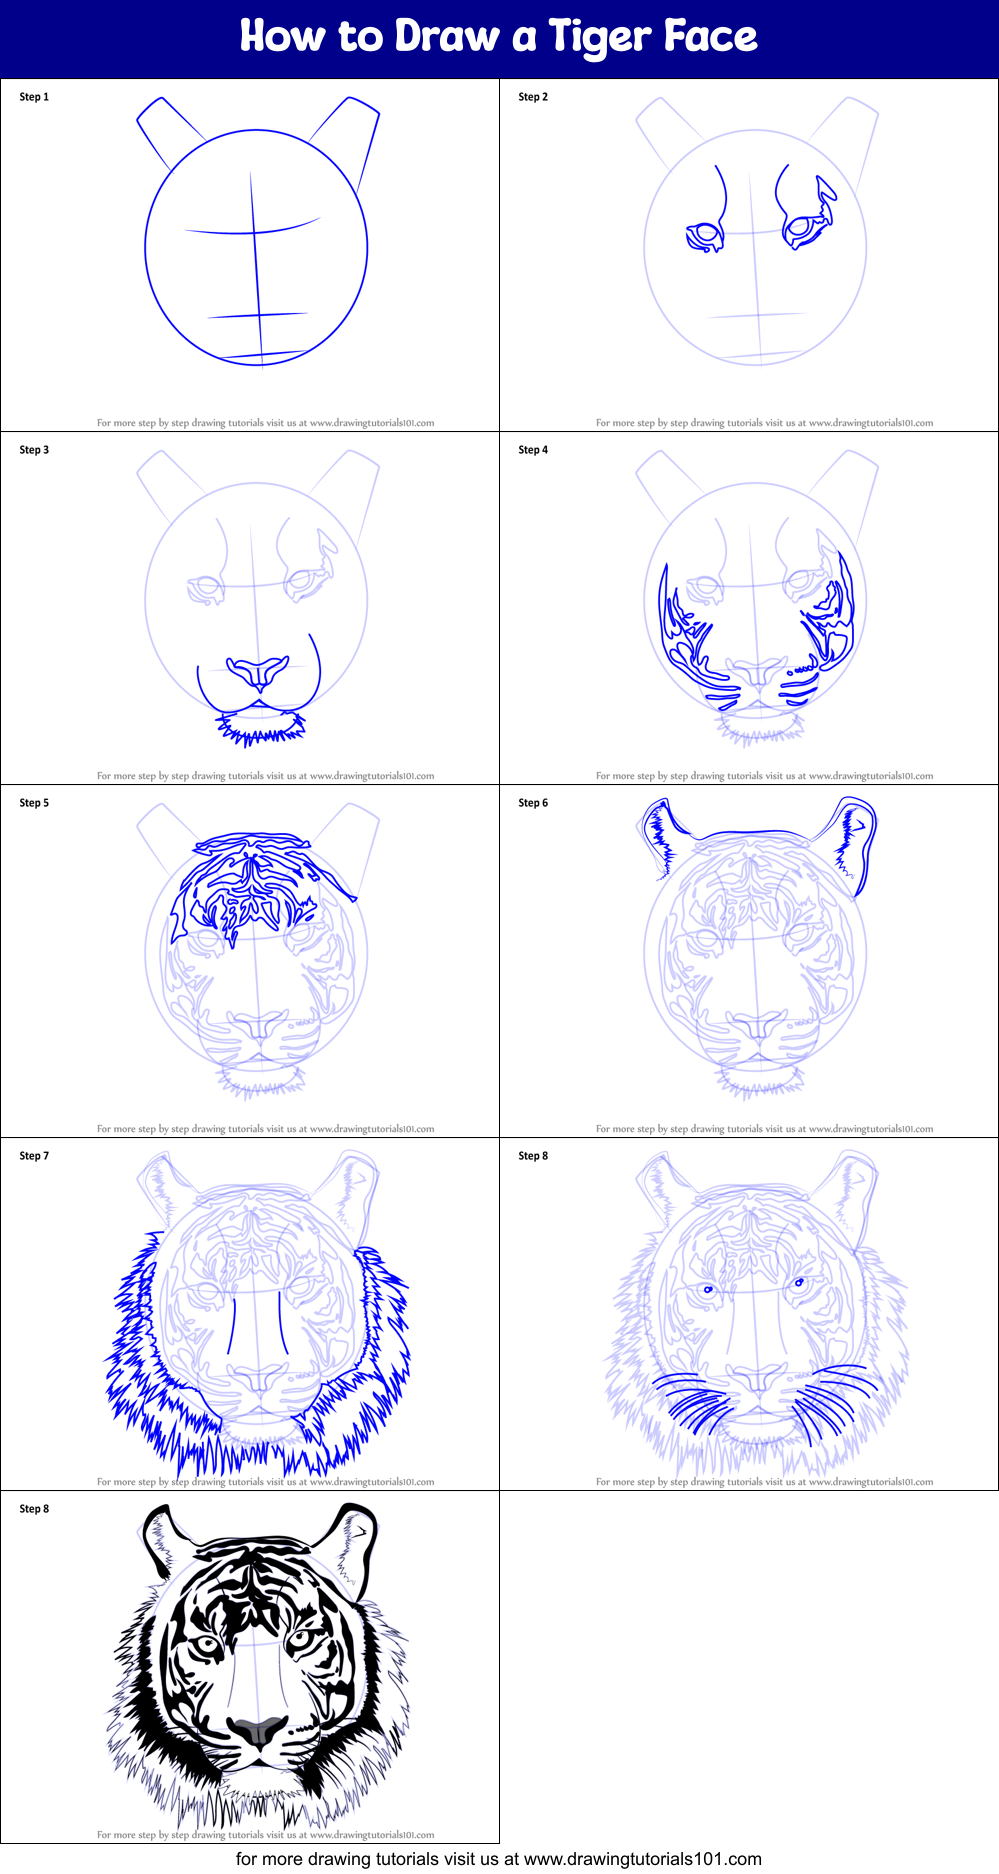 How to Draw a Tiger Face (Big Cats) Step by Step | DrawingTutorials101.com